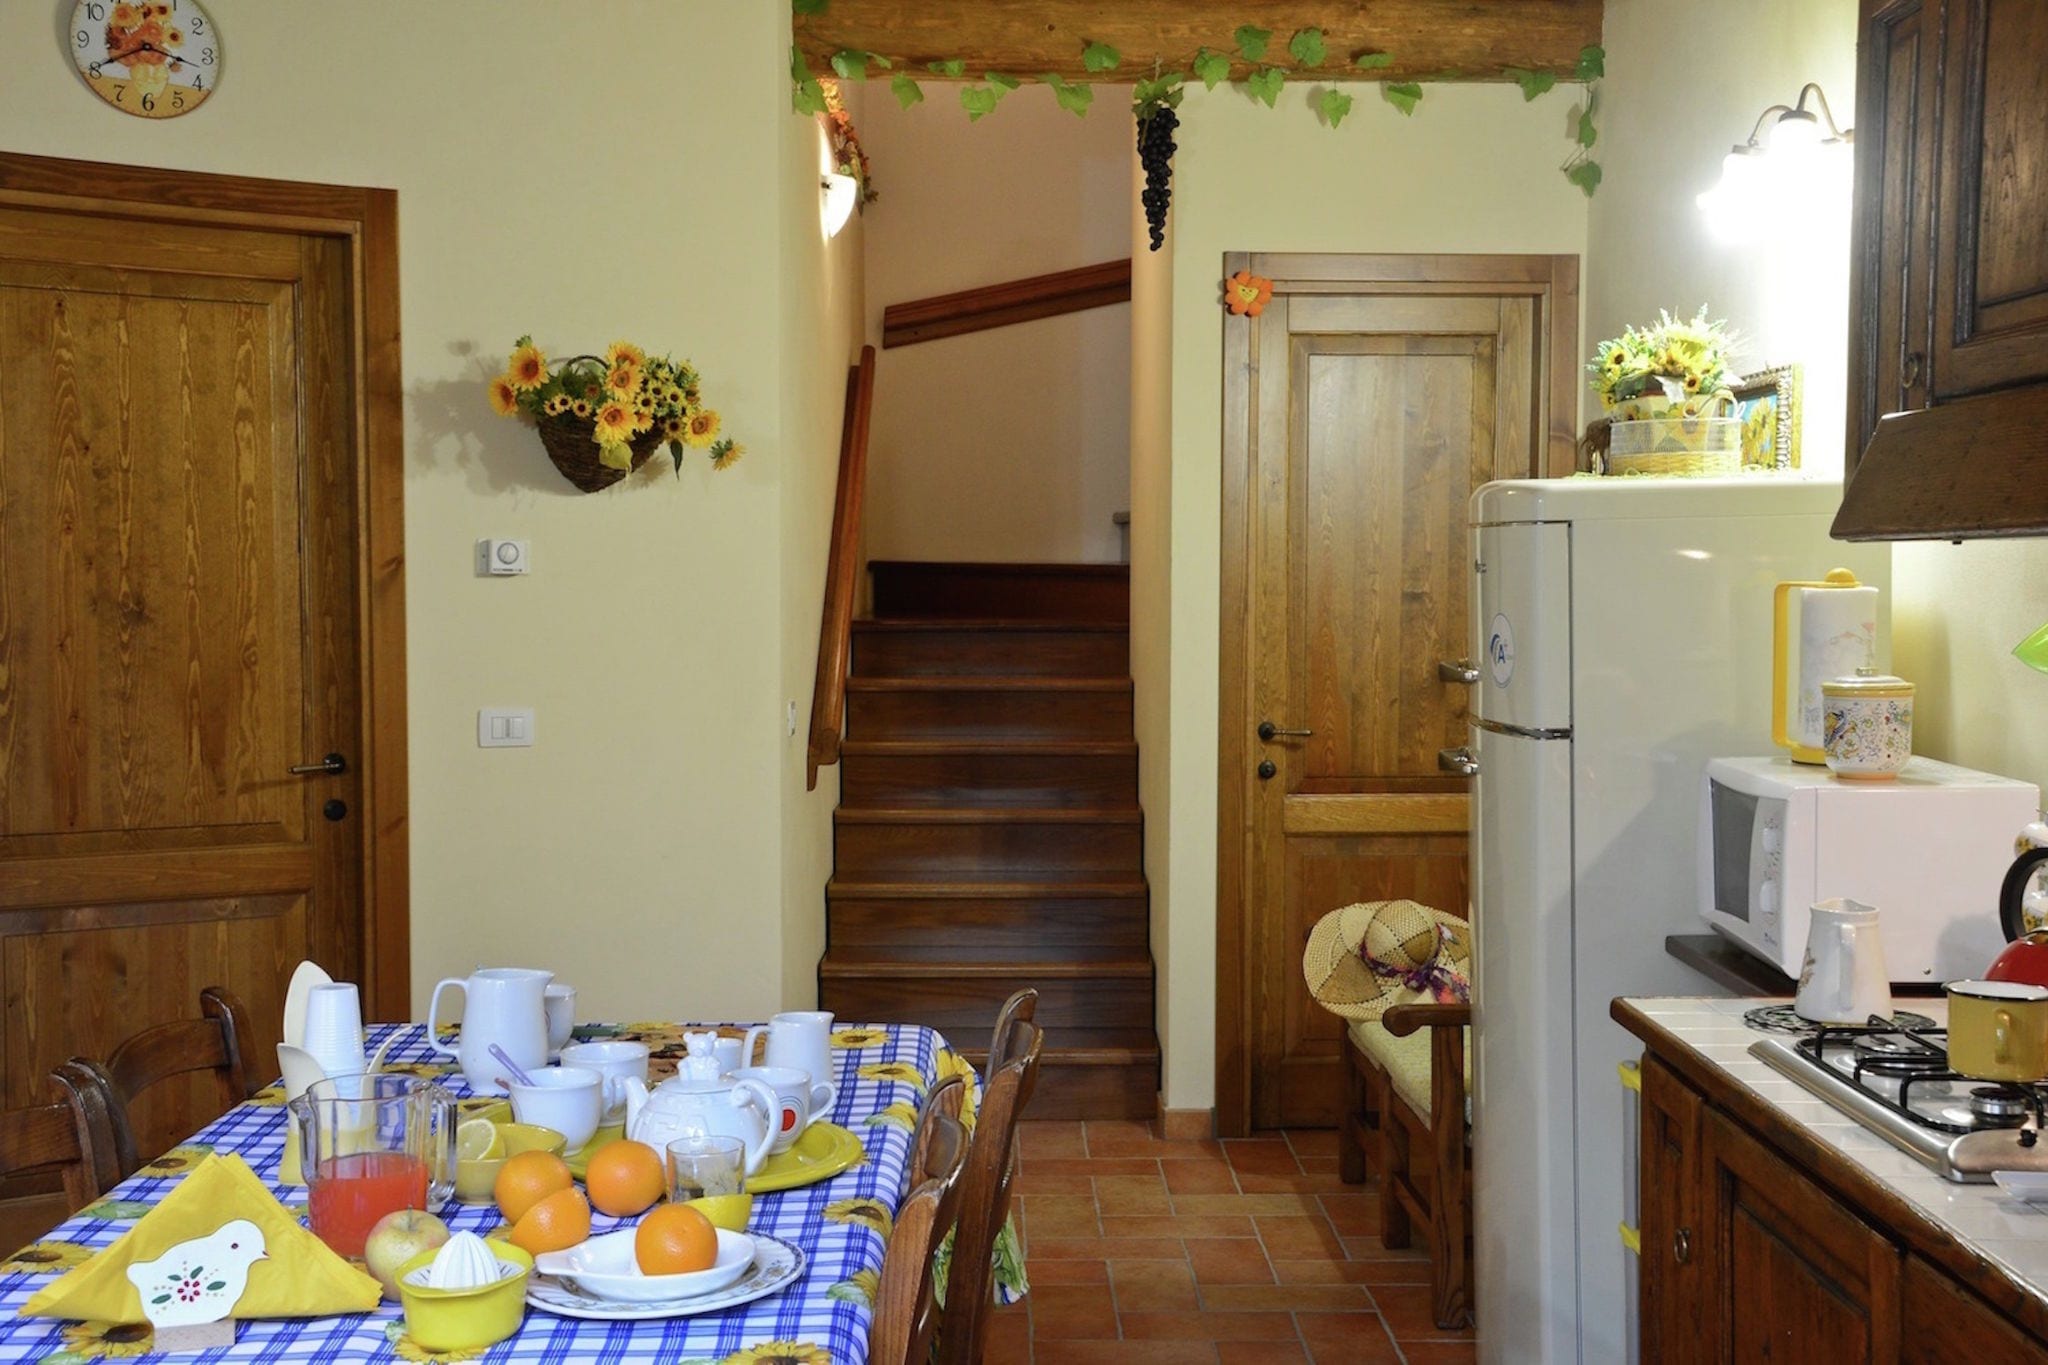 Country house with pool at 700 meters, cycling and walking opportunities